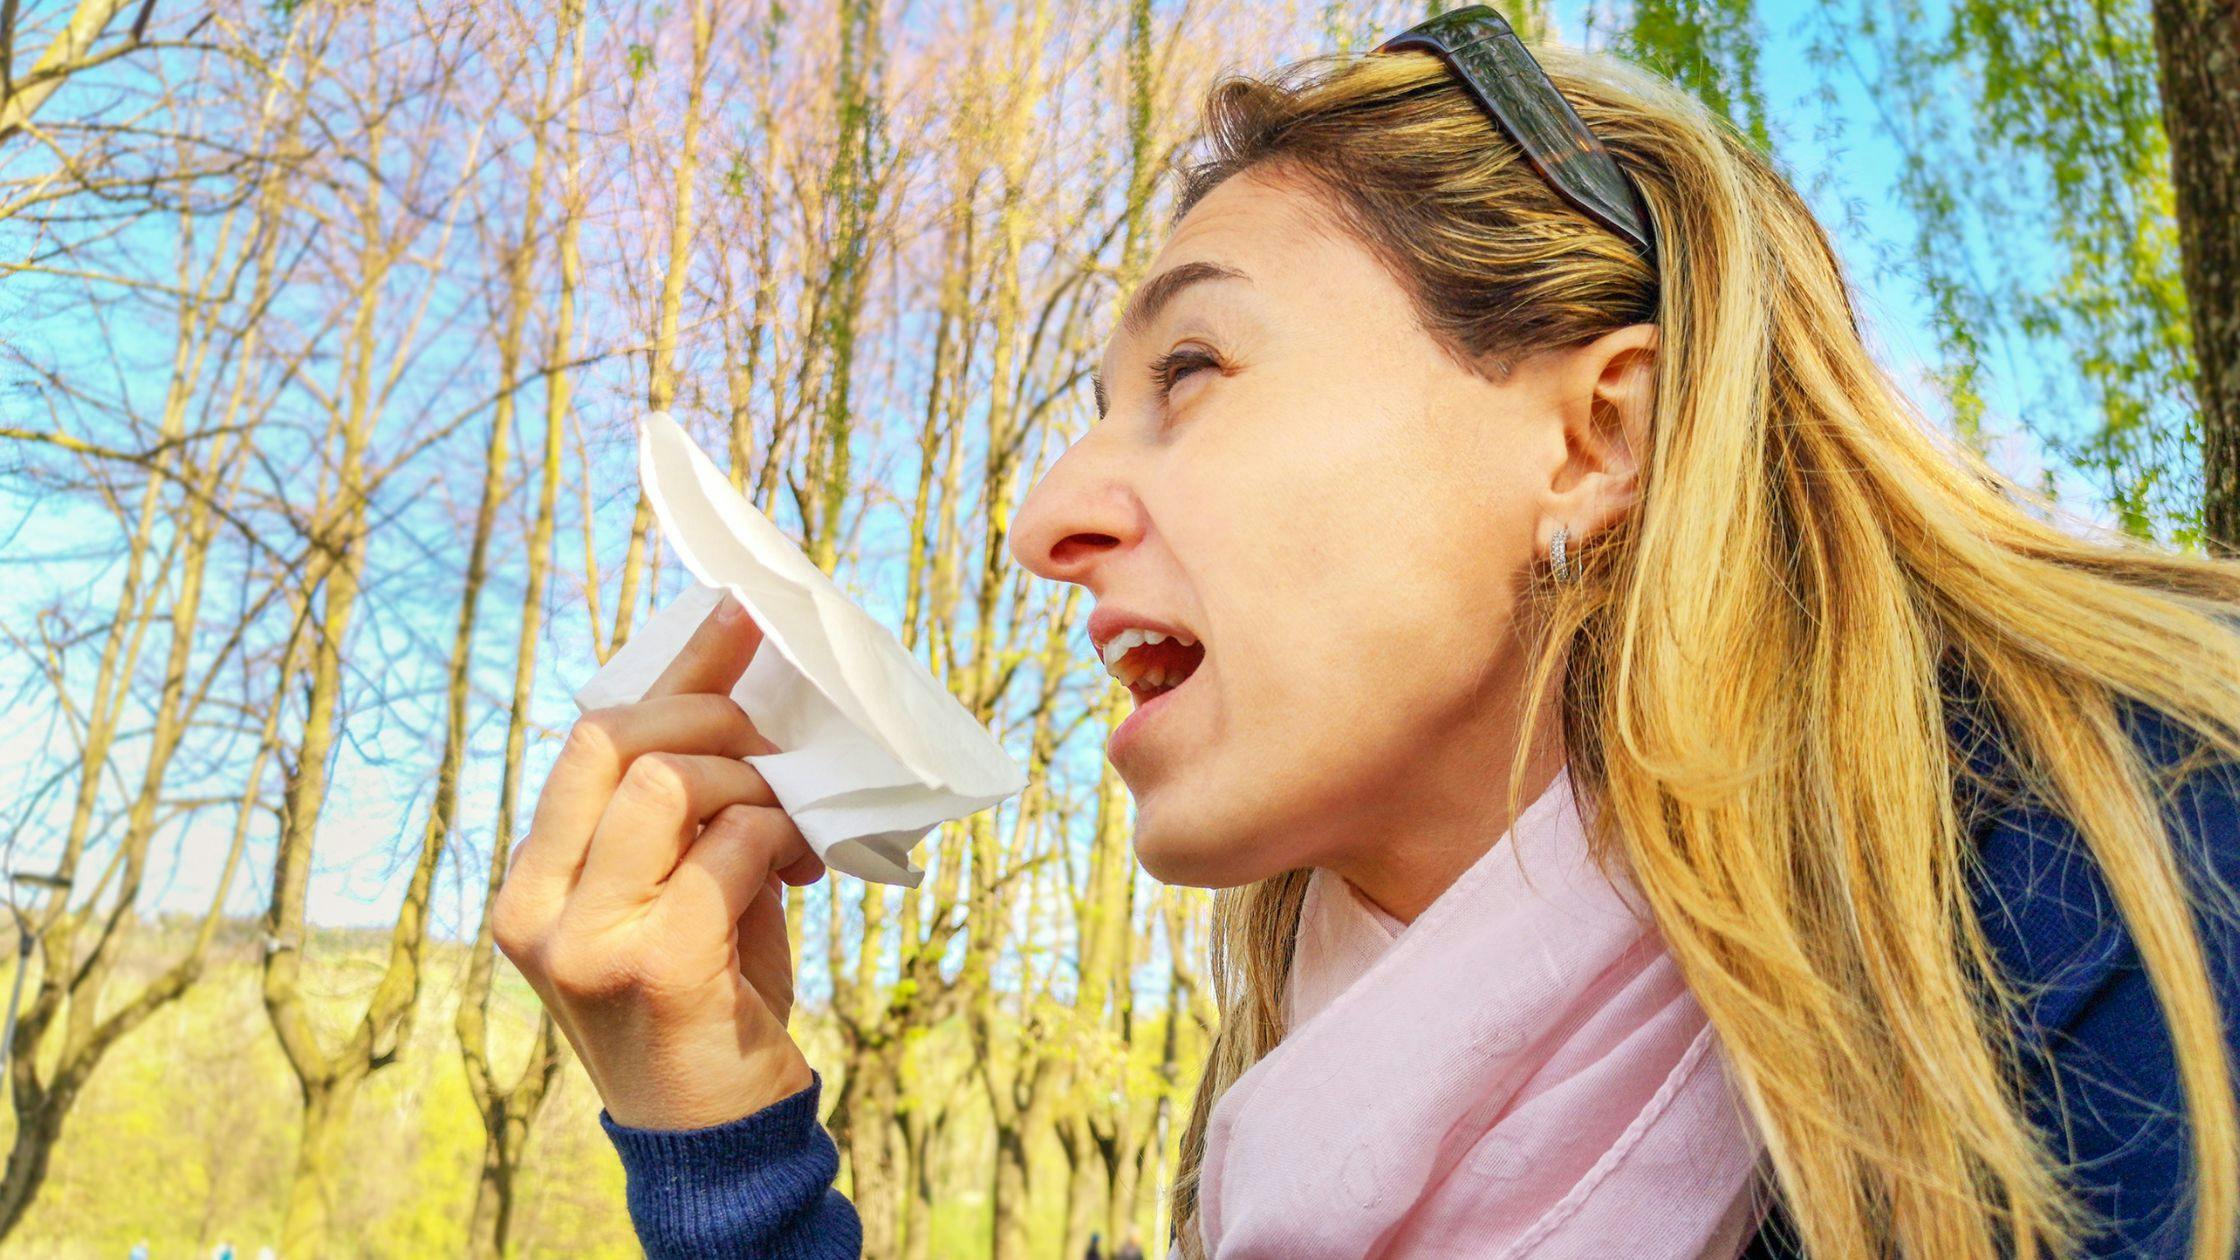 a woman is blowing her nose with a napkin in a park .